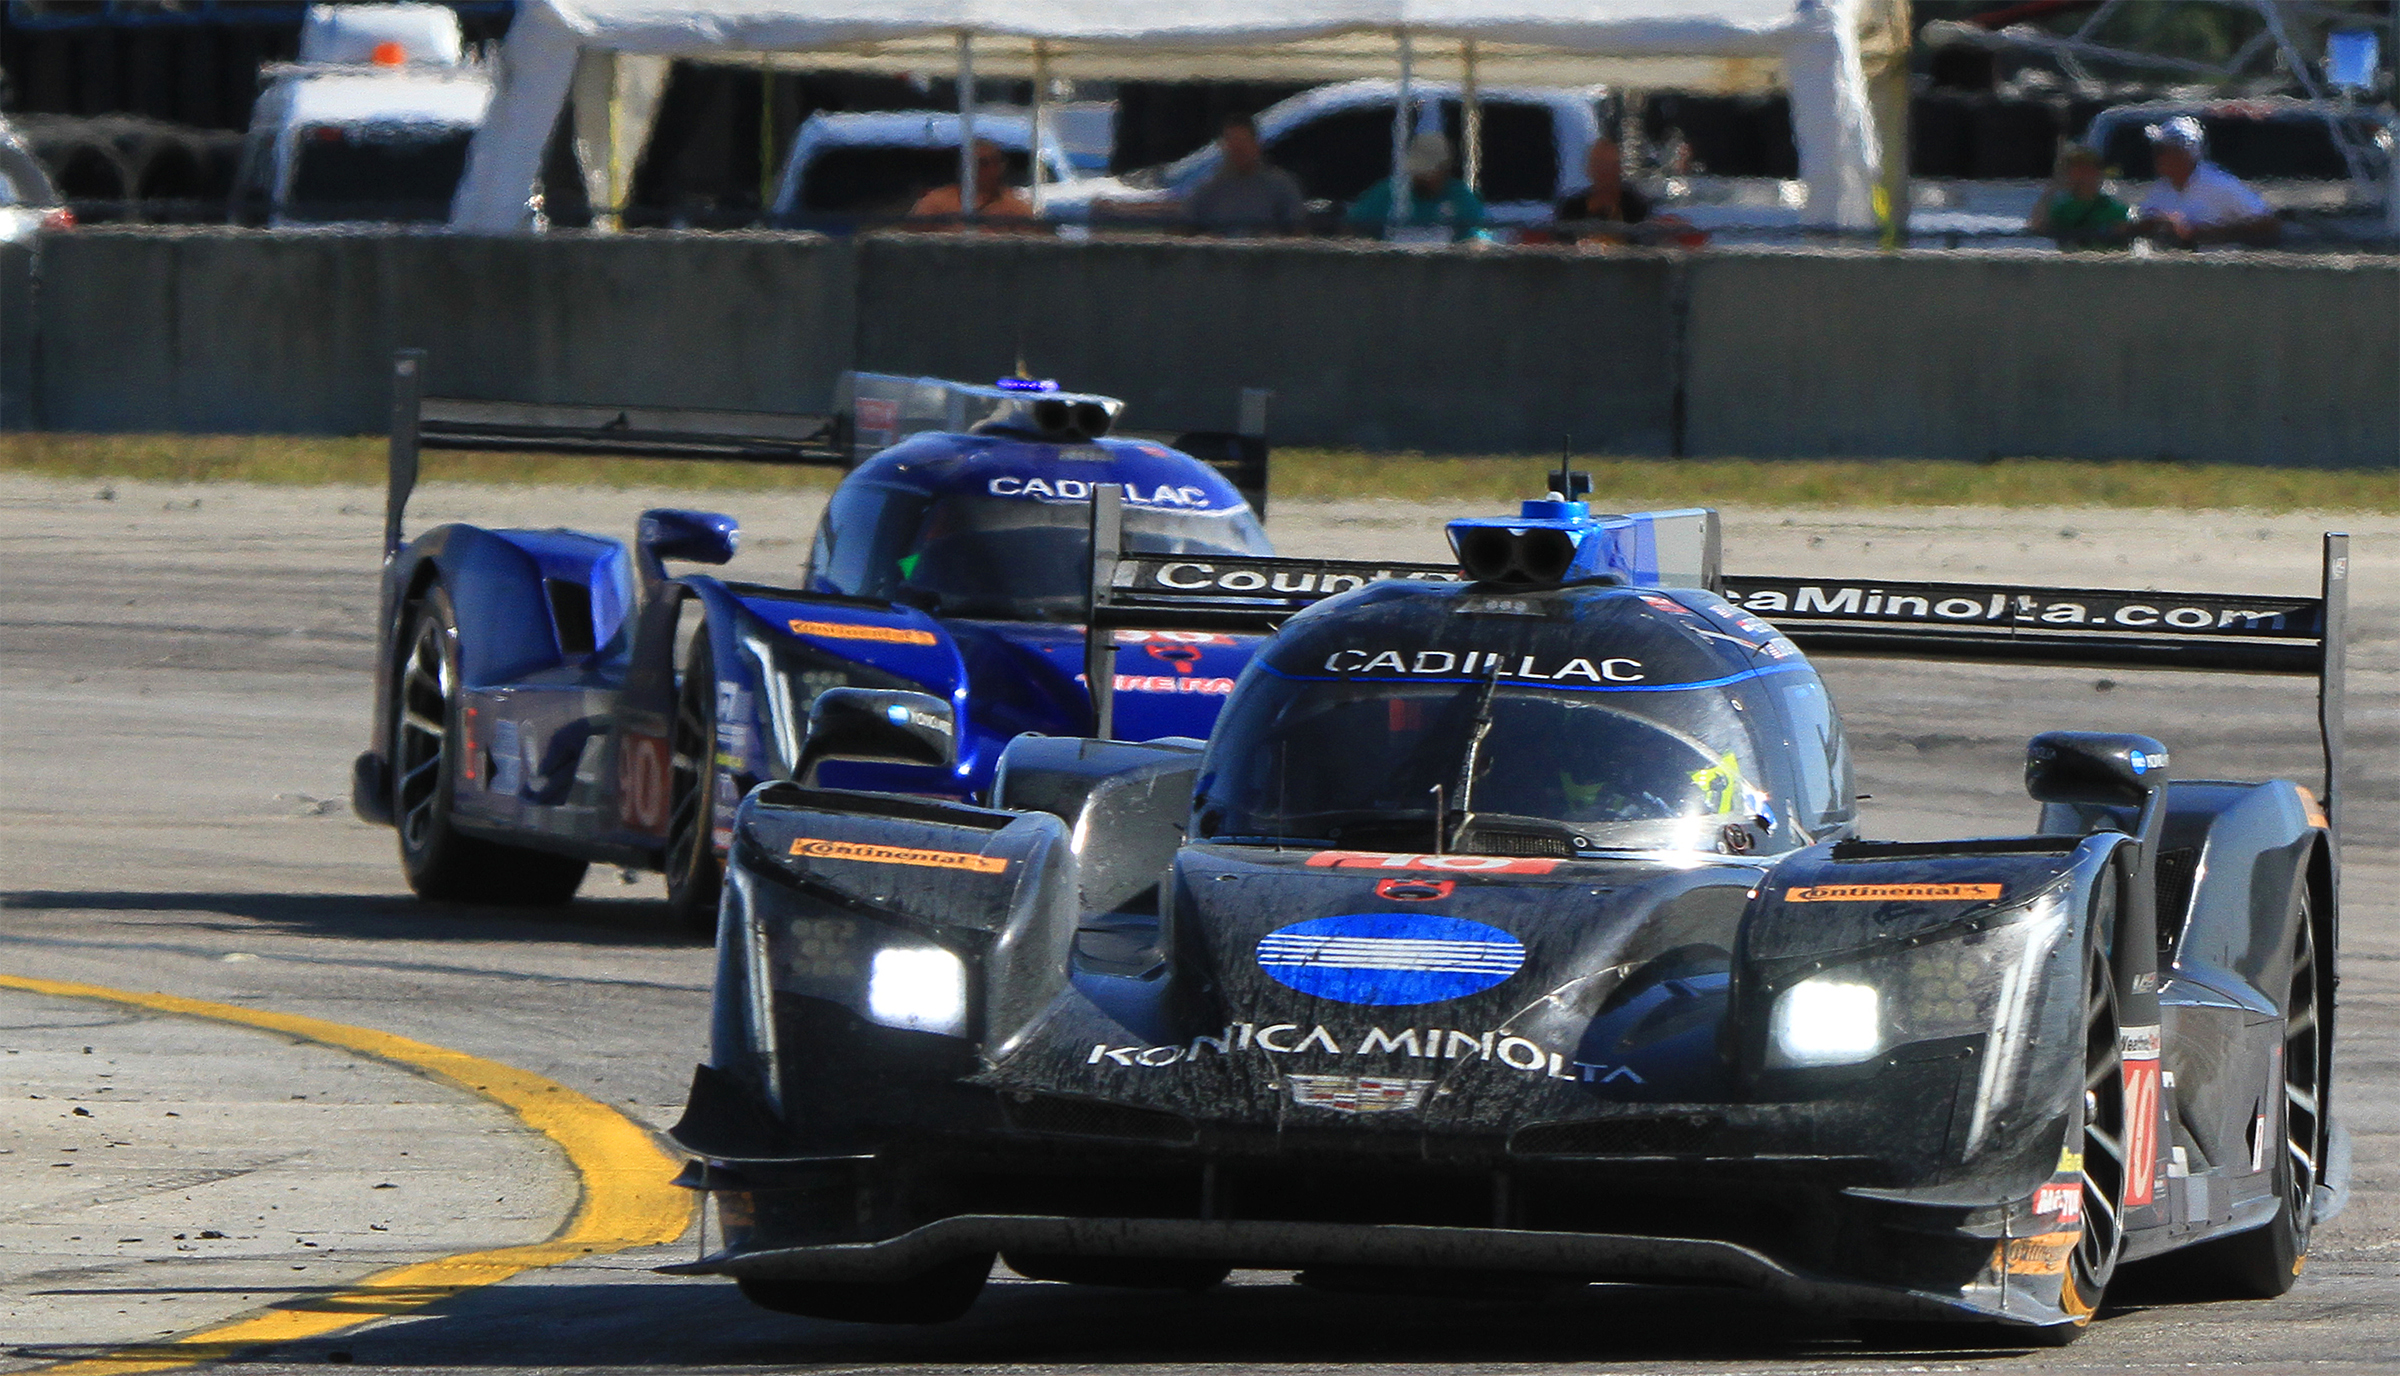 The #10 WTR Cadillac DPi gets two wheels in the air coming through Turn 17. The bumps at Turn 17 caused a couple of wrecks at the 2018 12 Hours. Cars can bounce sideways as well as up and down—that’s how the #6 Acura got knocked out, and the Frank Montecalvo in the #64 Scuderia Corsa Ferrari ended up on its roof after hitting the spinning #52 AFS/PR1 Ligier. (Chris Jasurek/Epoch Times)